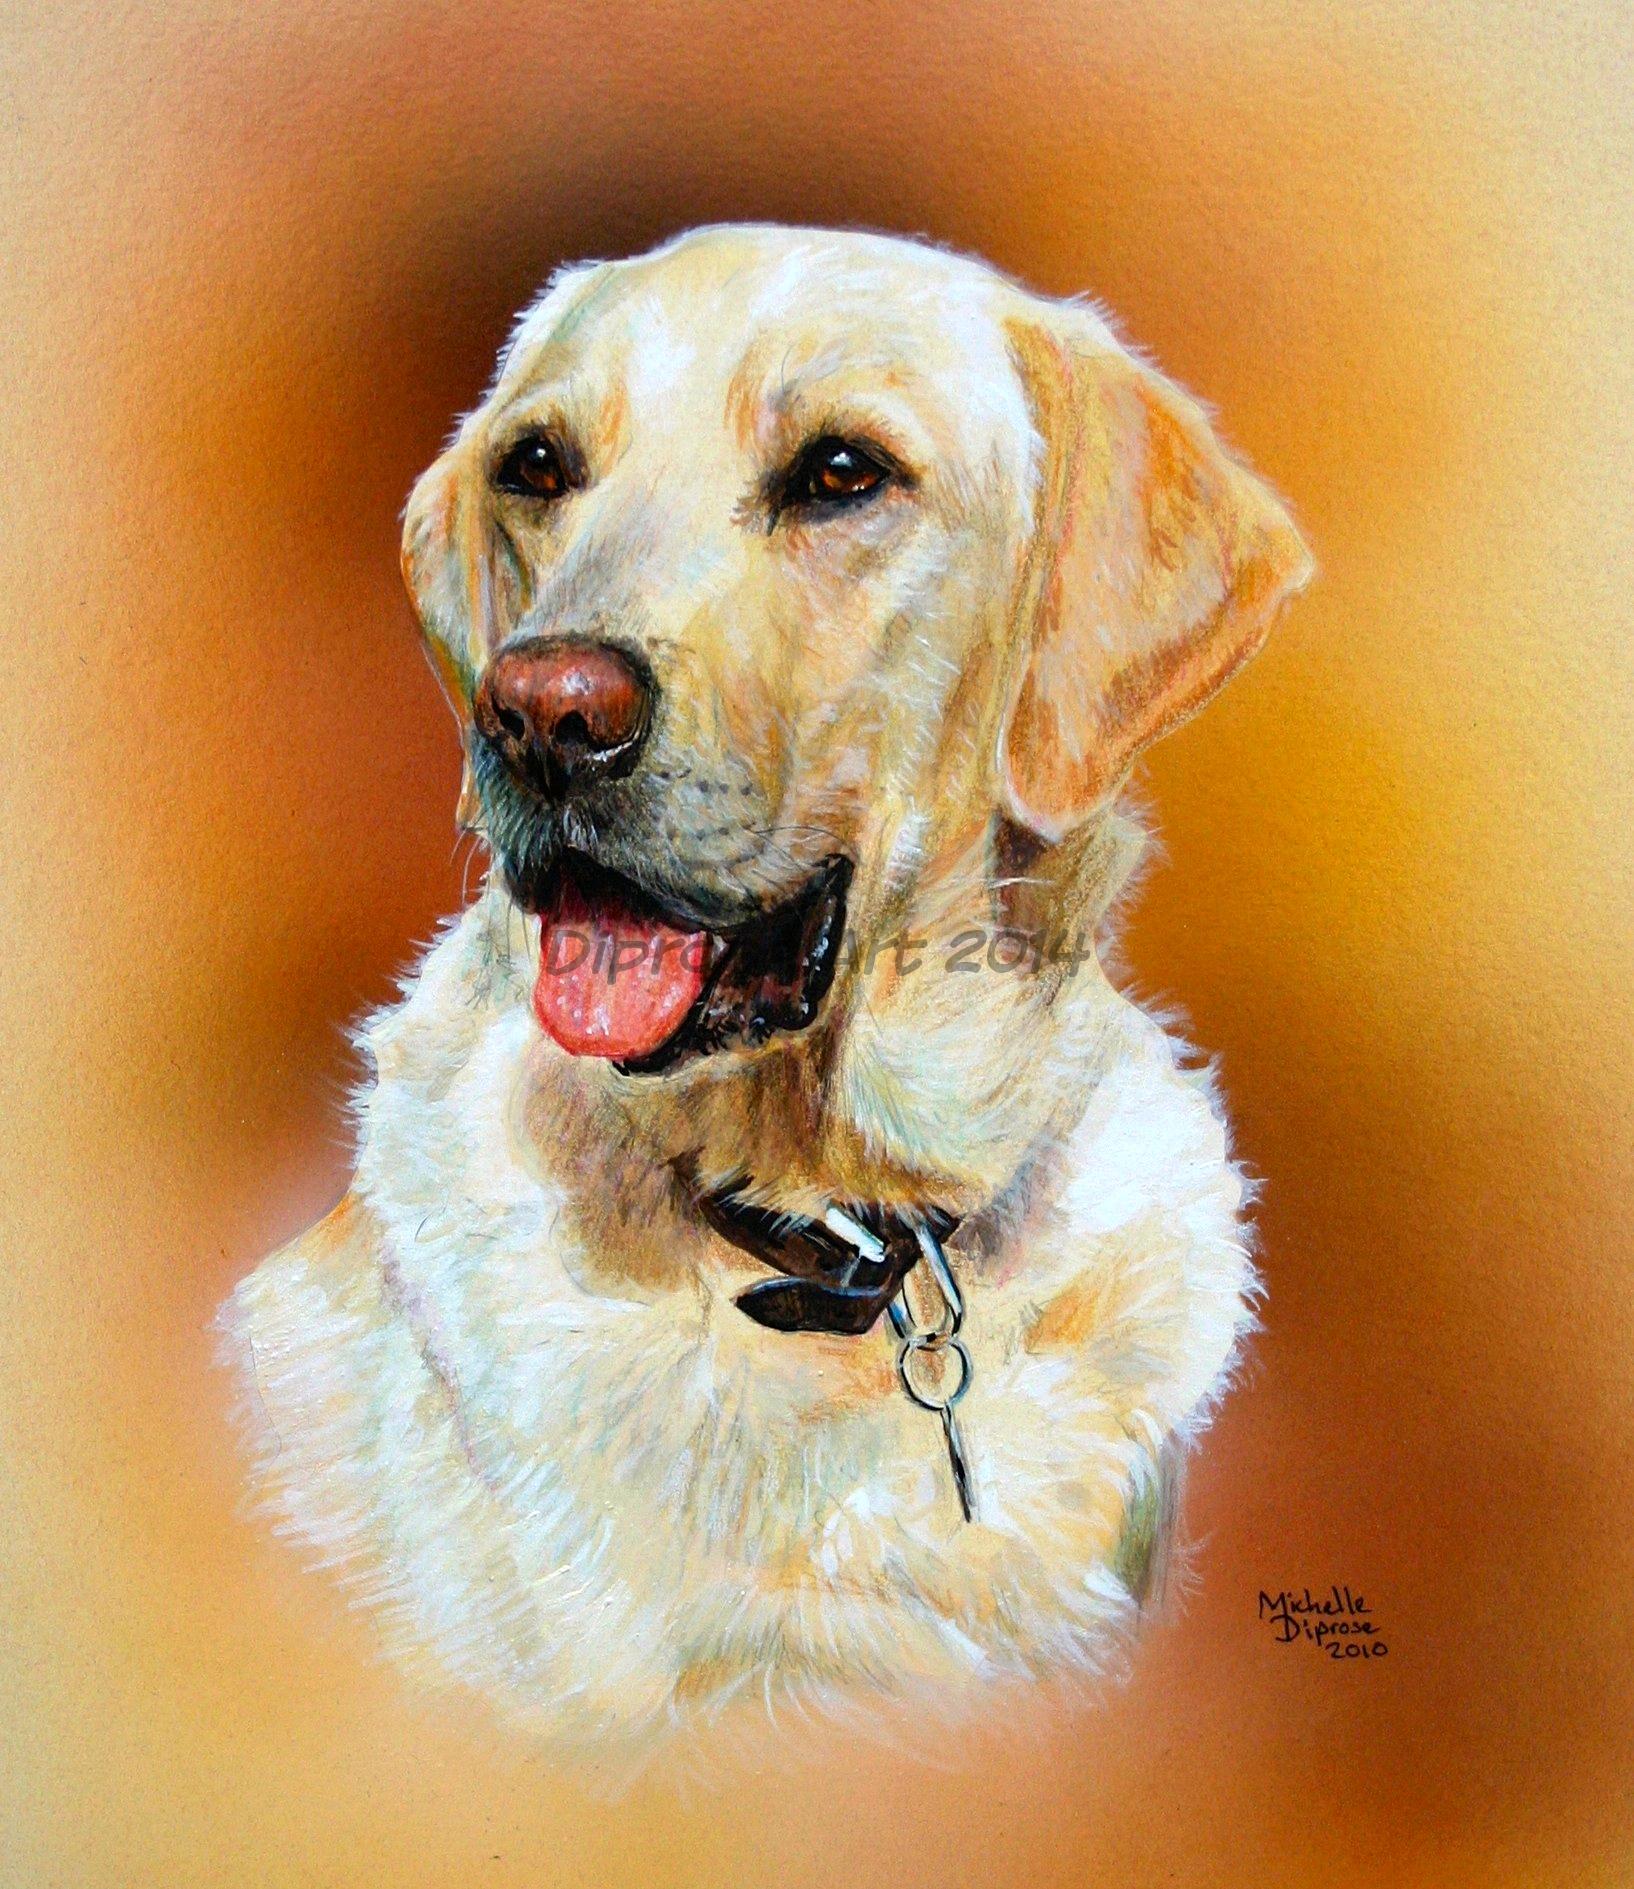 Acrylics on board - approx A4 - pet dog portrait - Winston is a happy go lucky retriever with a cheerful disposition.